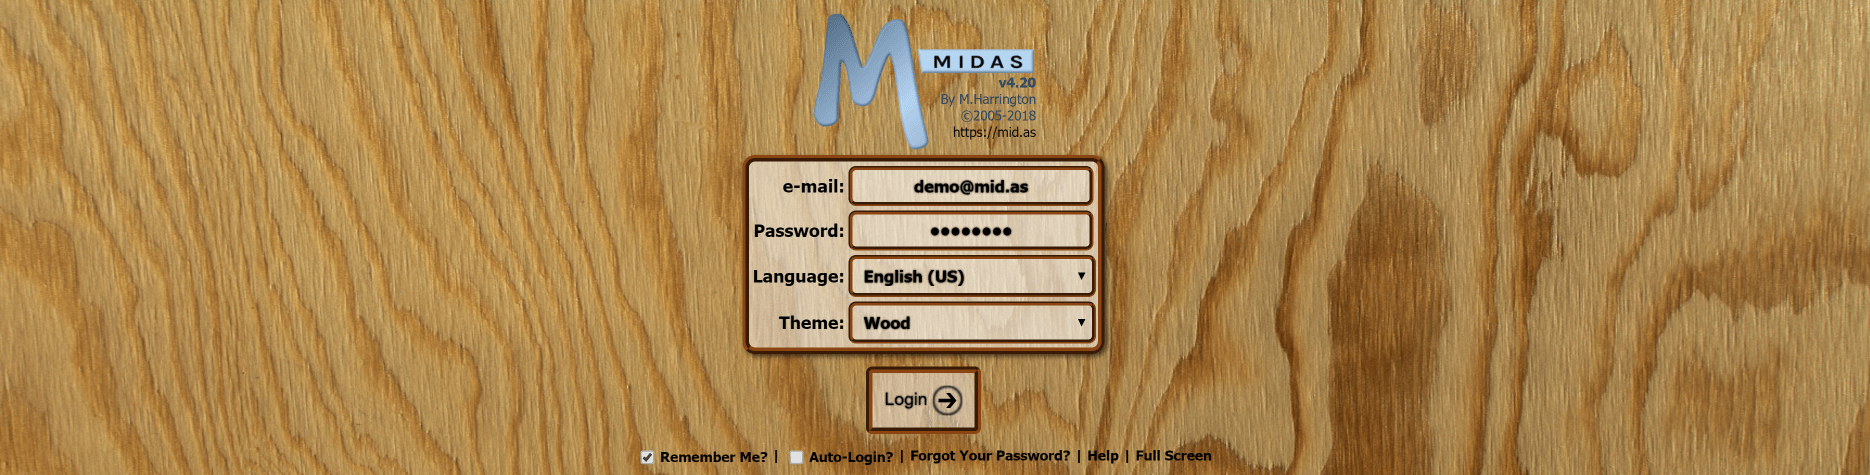 New Wood effect theme for MIDAS